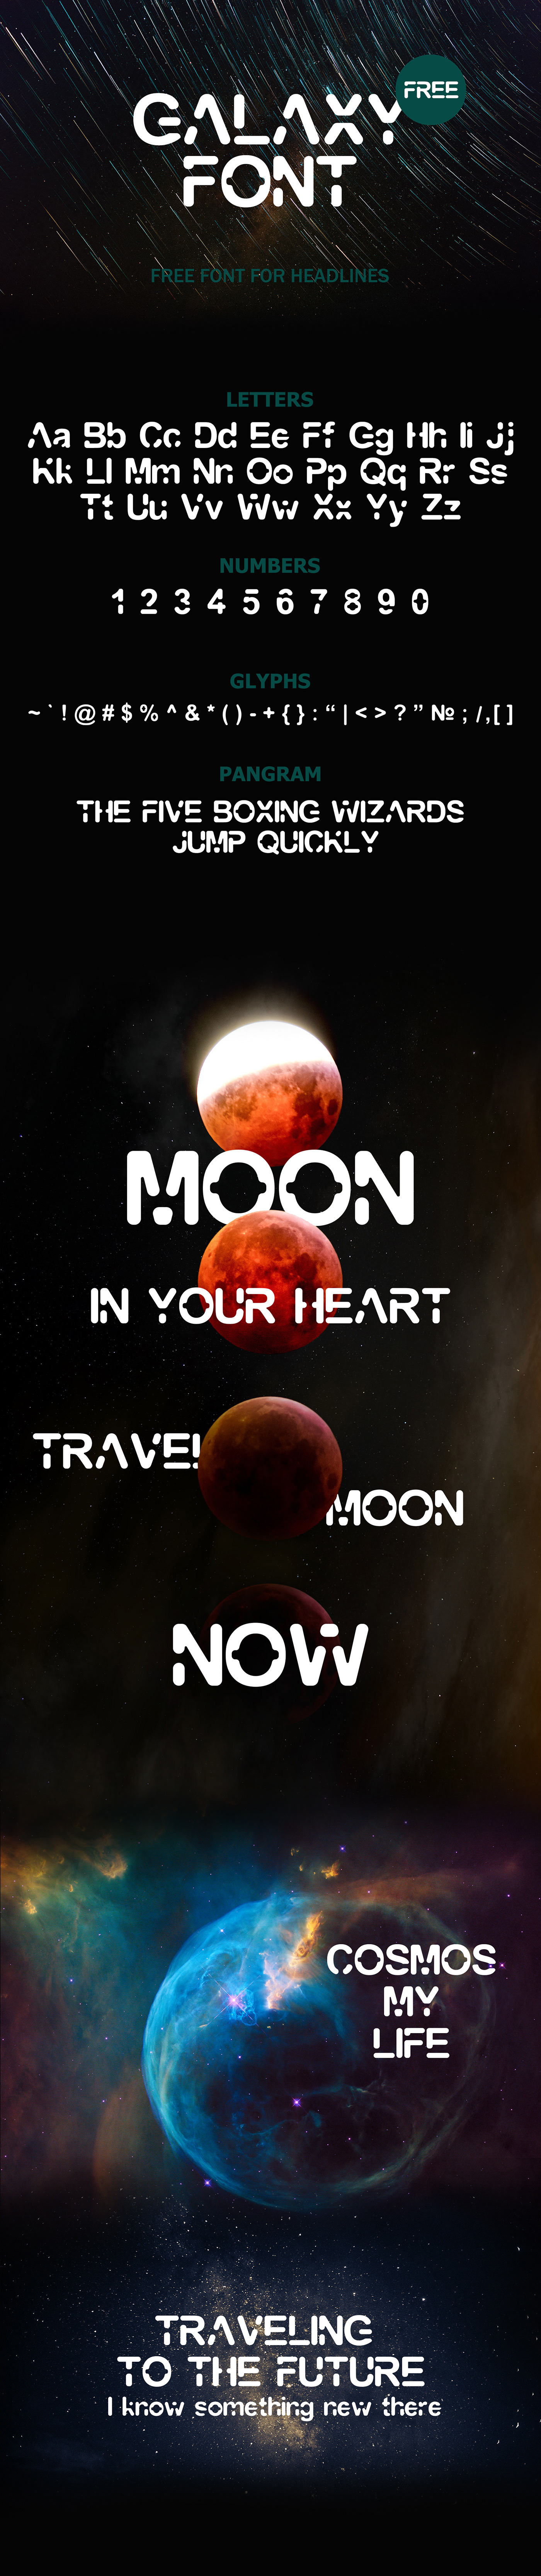 galaxy free font Typeface future typography   cosmos planet moon type